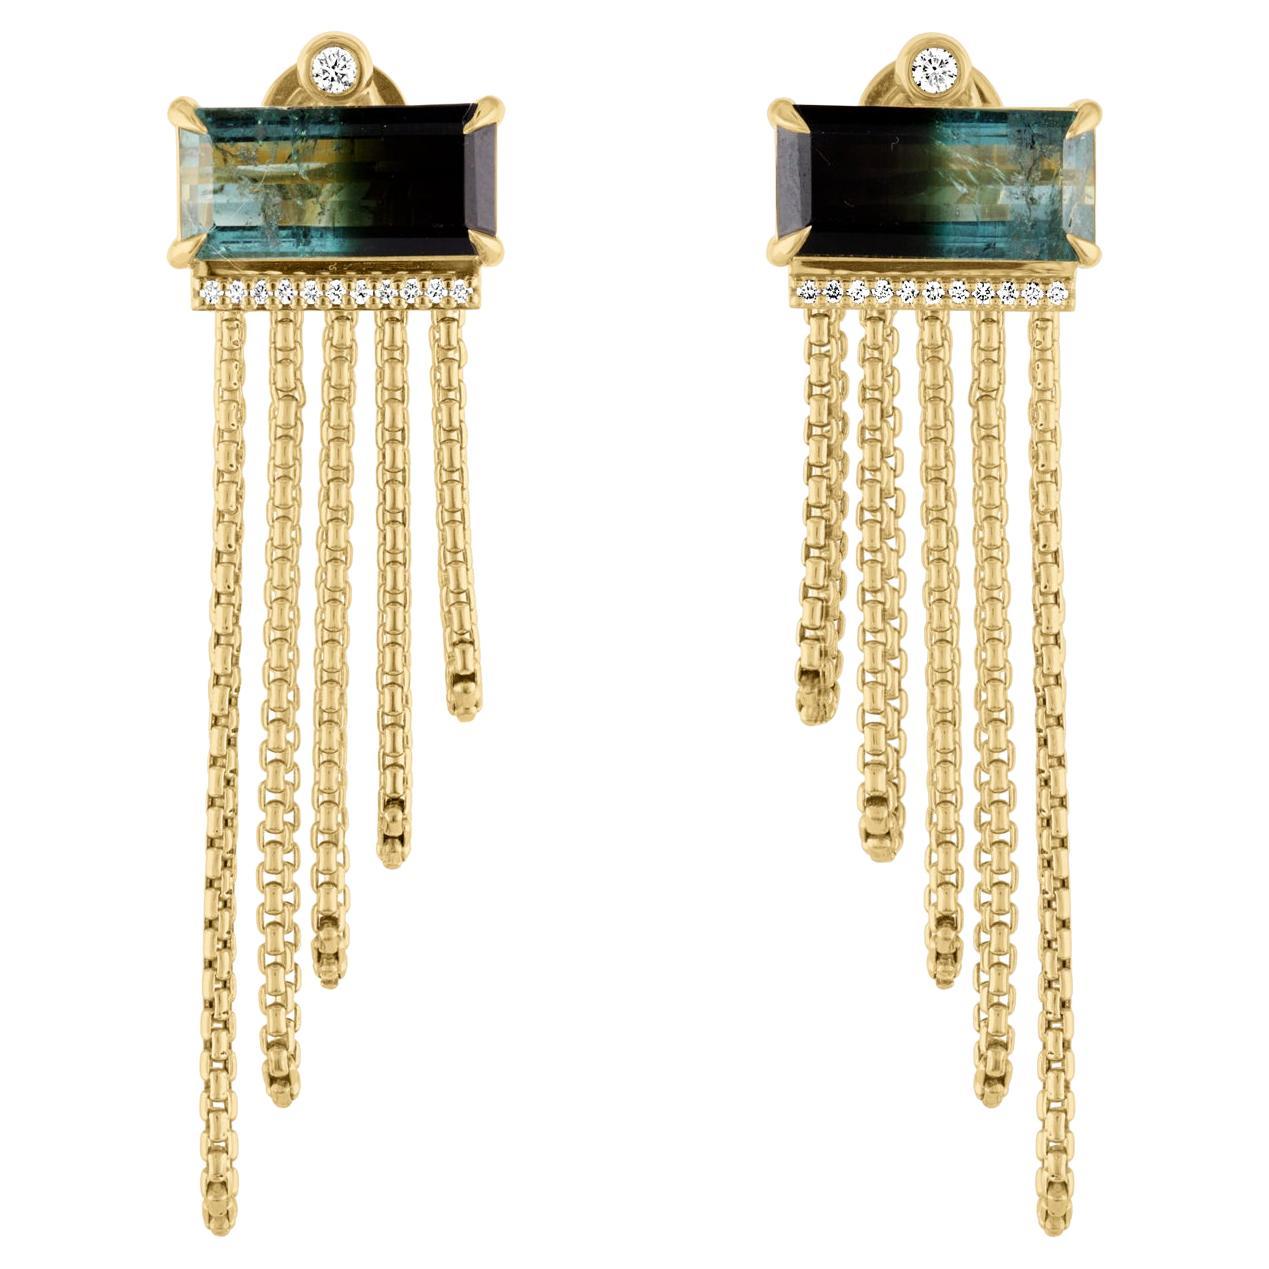 Ombré Lagoon Tourmaline Chain Statement Earrings in 18k and Diamonds